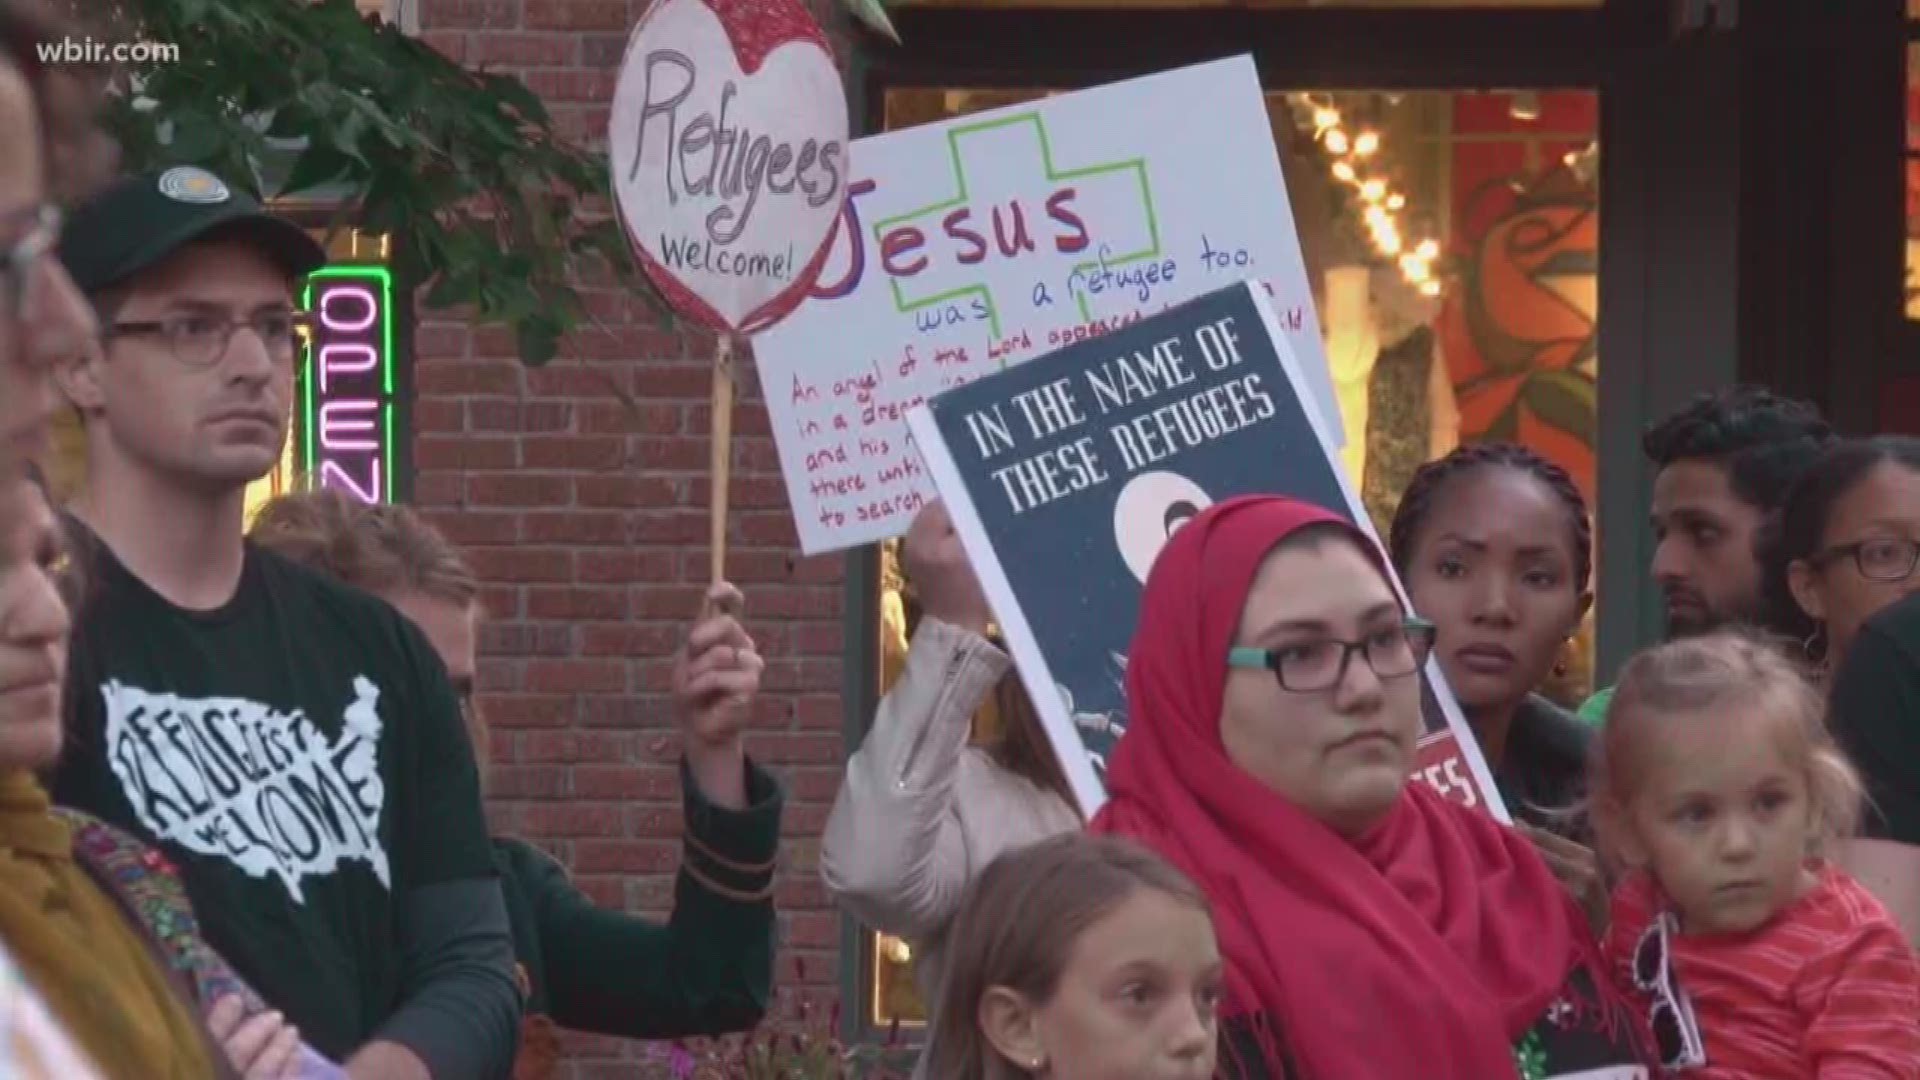 Oct. 18, 2017: Several East Tennessee immigrants' rights groups gathered to protest President Trump's travel ban.Even though the latest version of the ban was blocked, protesters say they won't stop fighting.